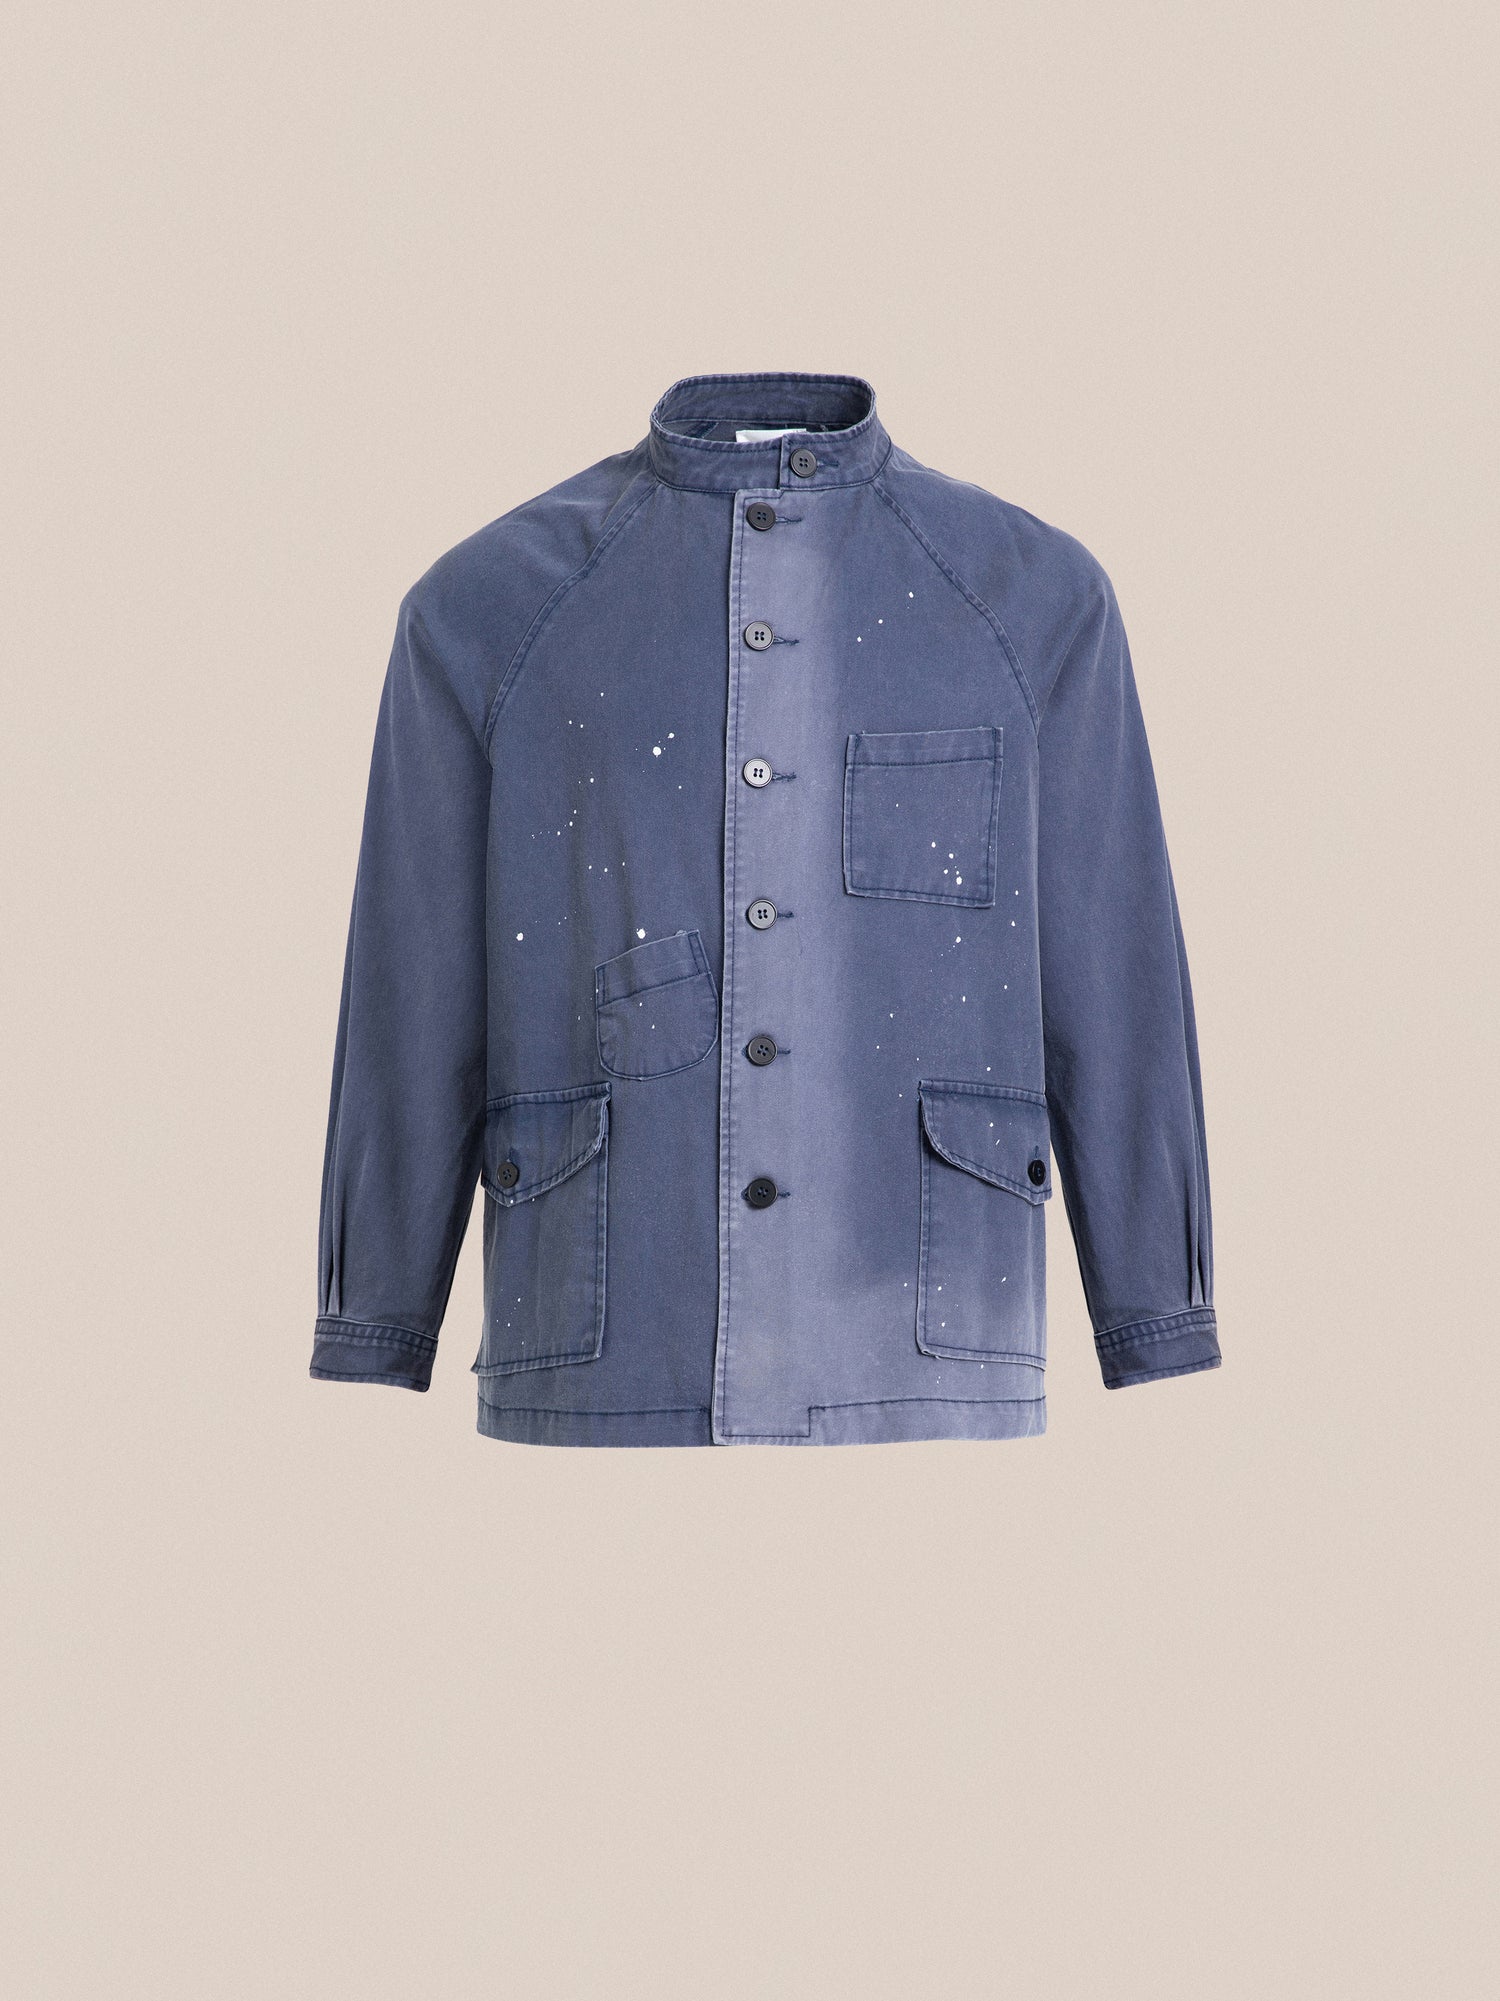 Denim jacket - Burberry - Found River Painters Chore Coat gallery image 1.